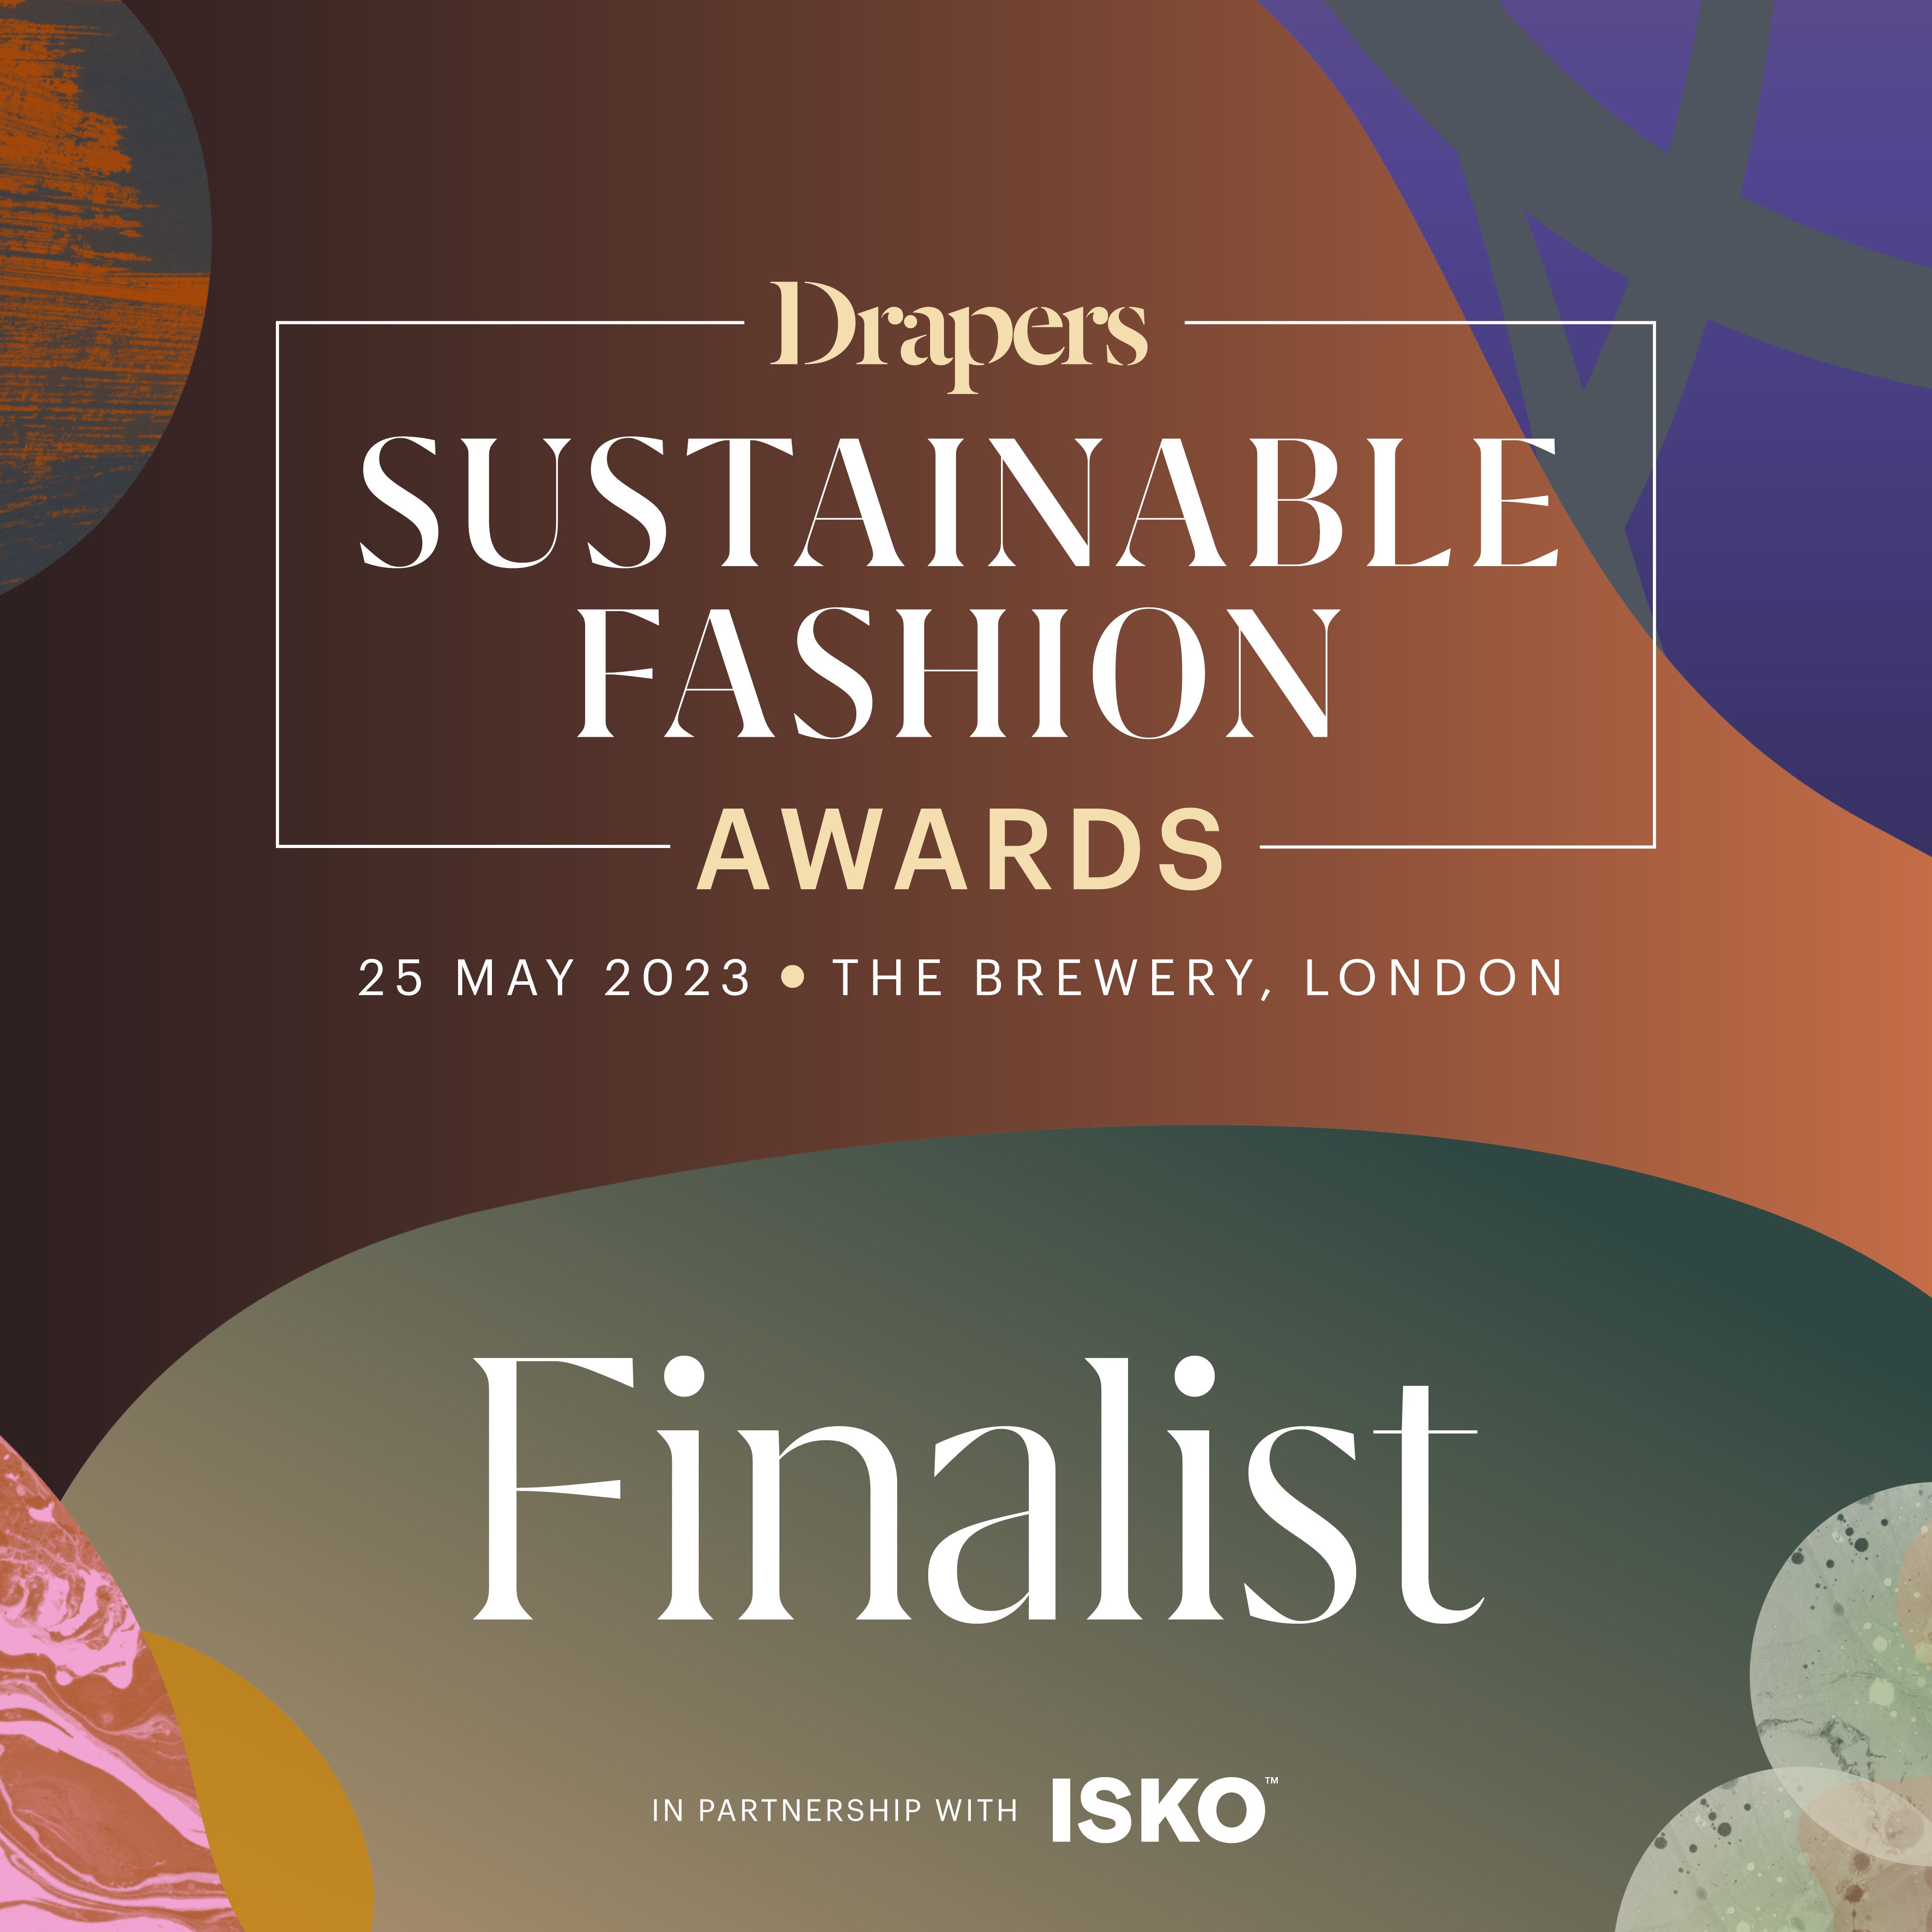 Finalists in the Drapers Sustainable Fashion Awards 2023